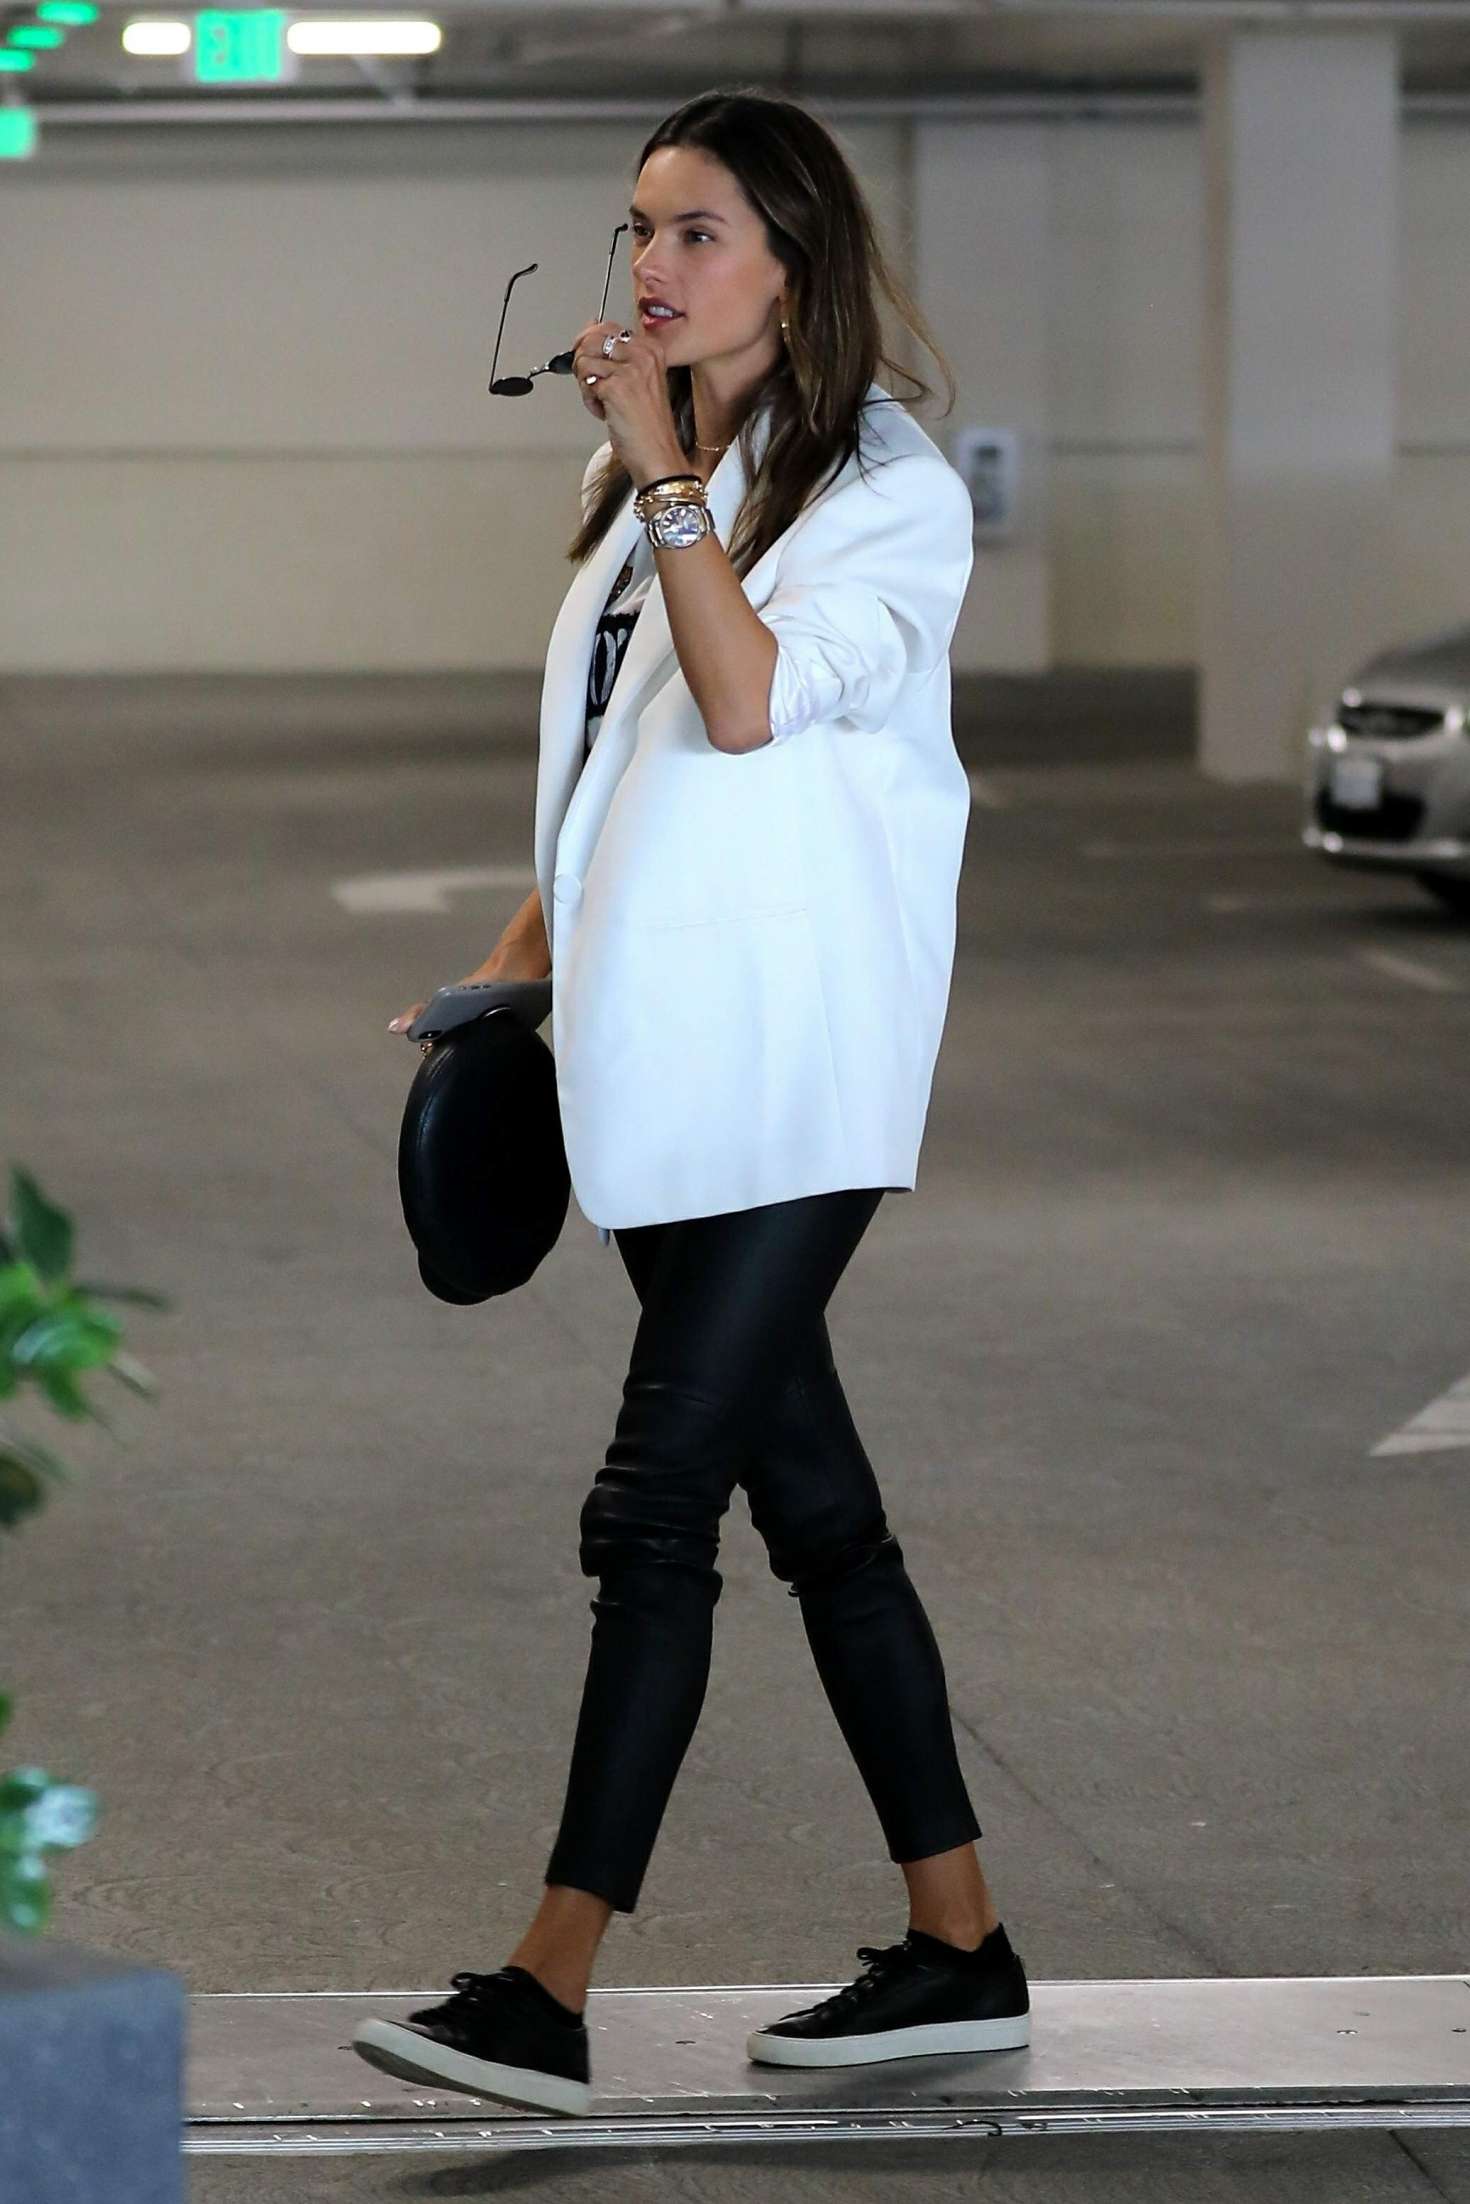 Alessandra Ambrosio out in Los Angeles